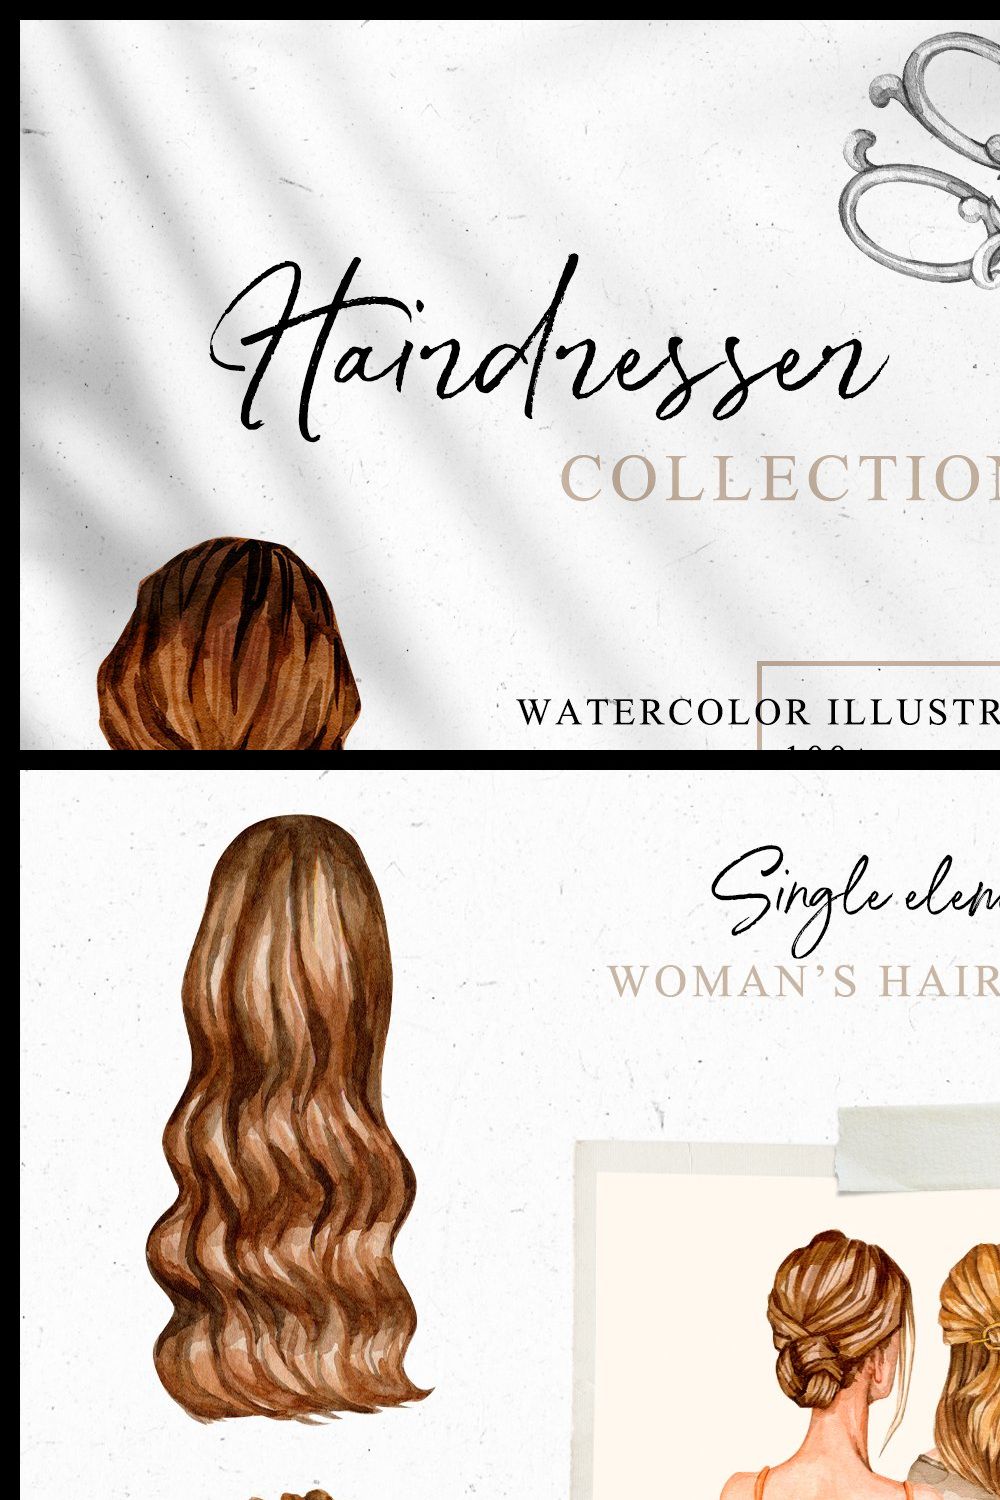 Hairdresser Collection pinterest preview image.